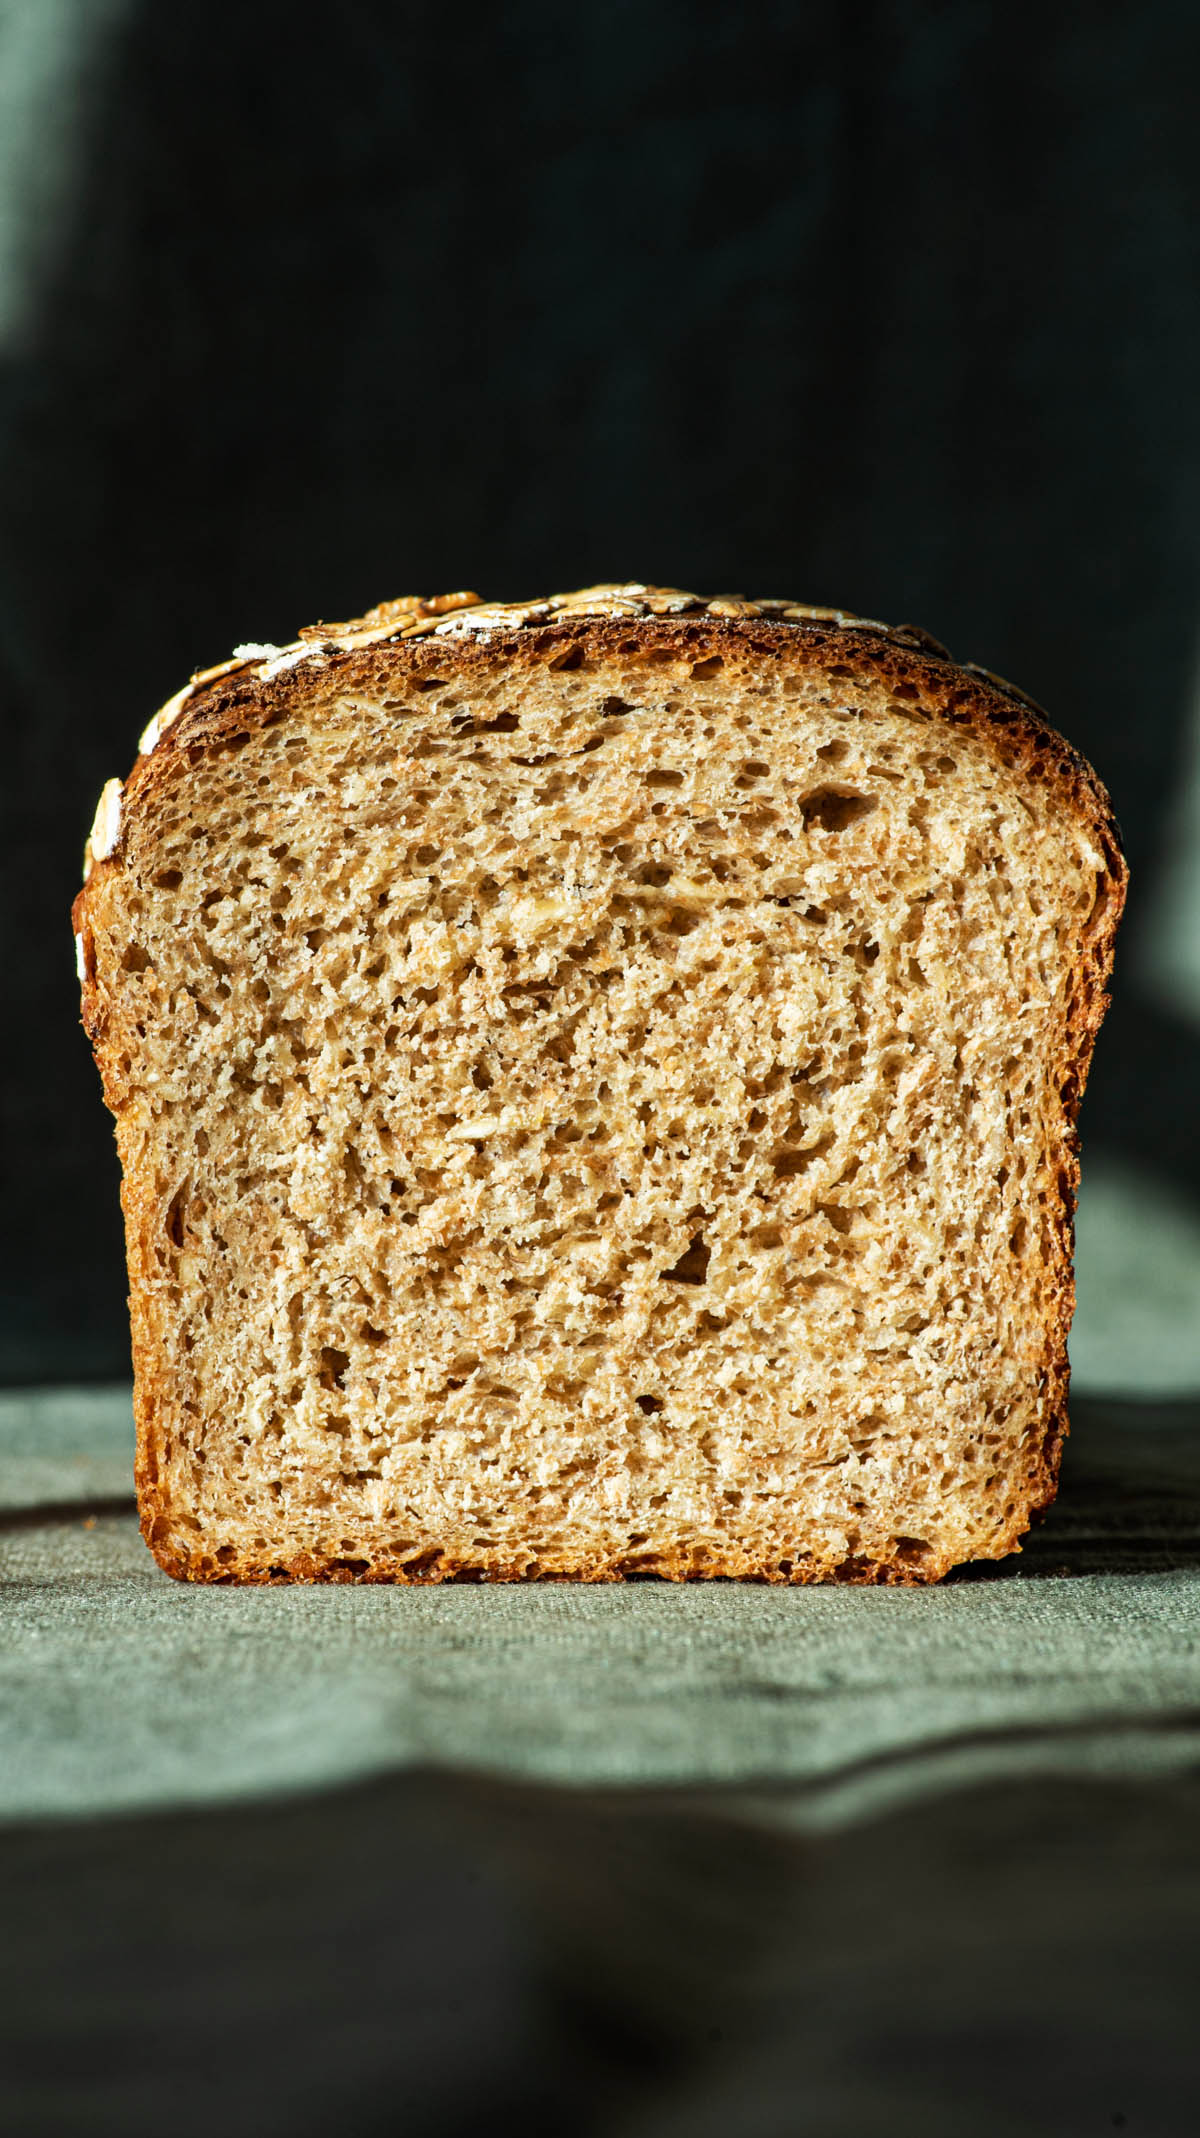 Loaf of bread sliced in half, front view, to show crumb.